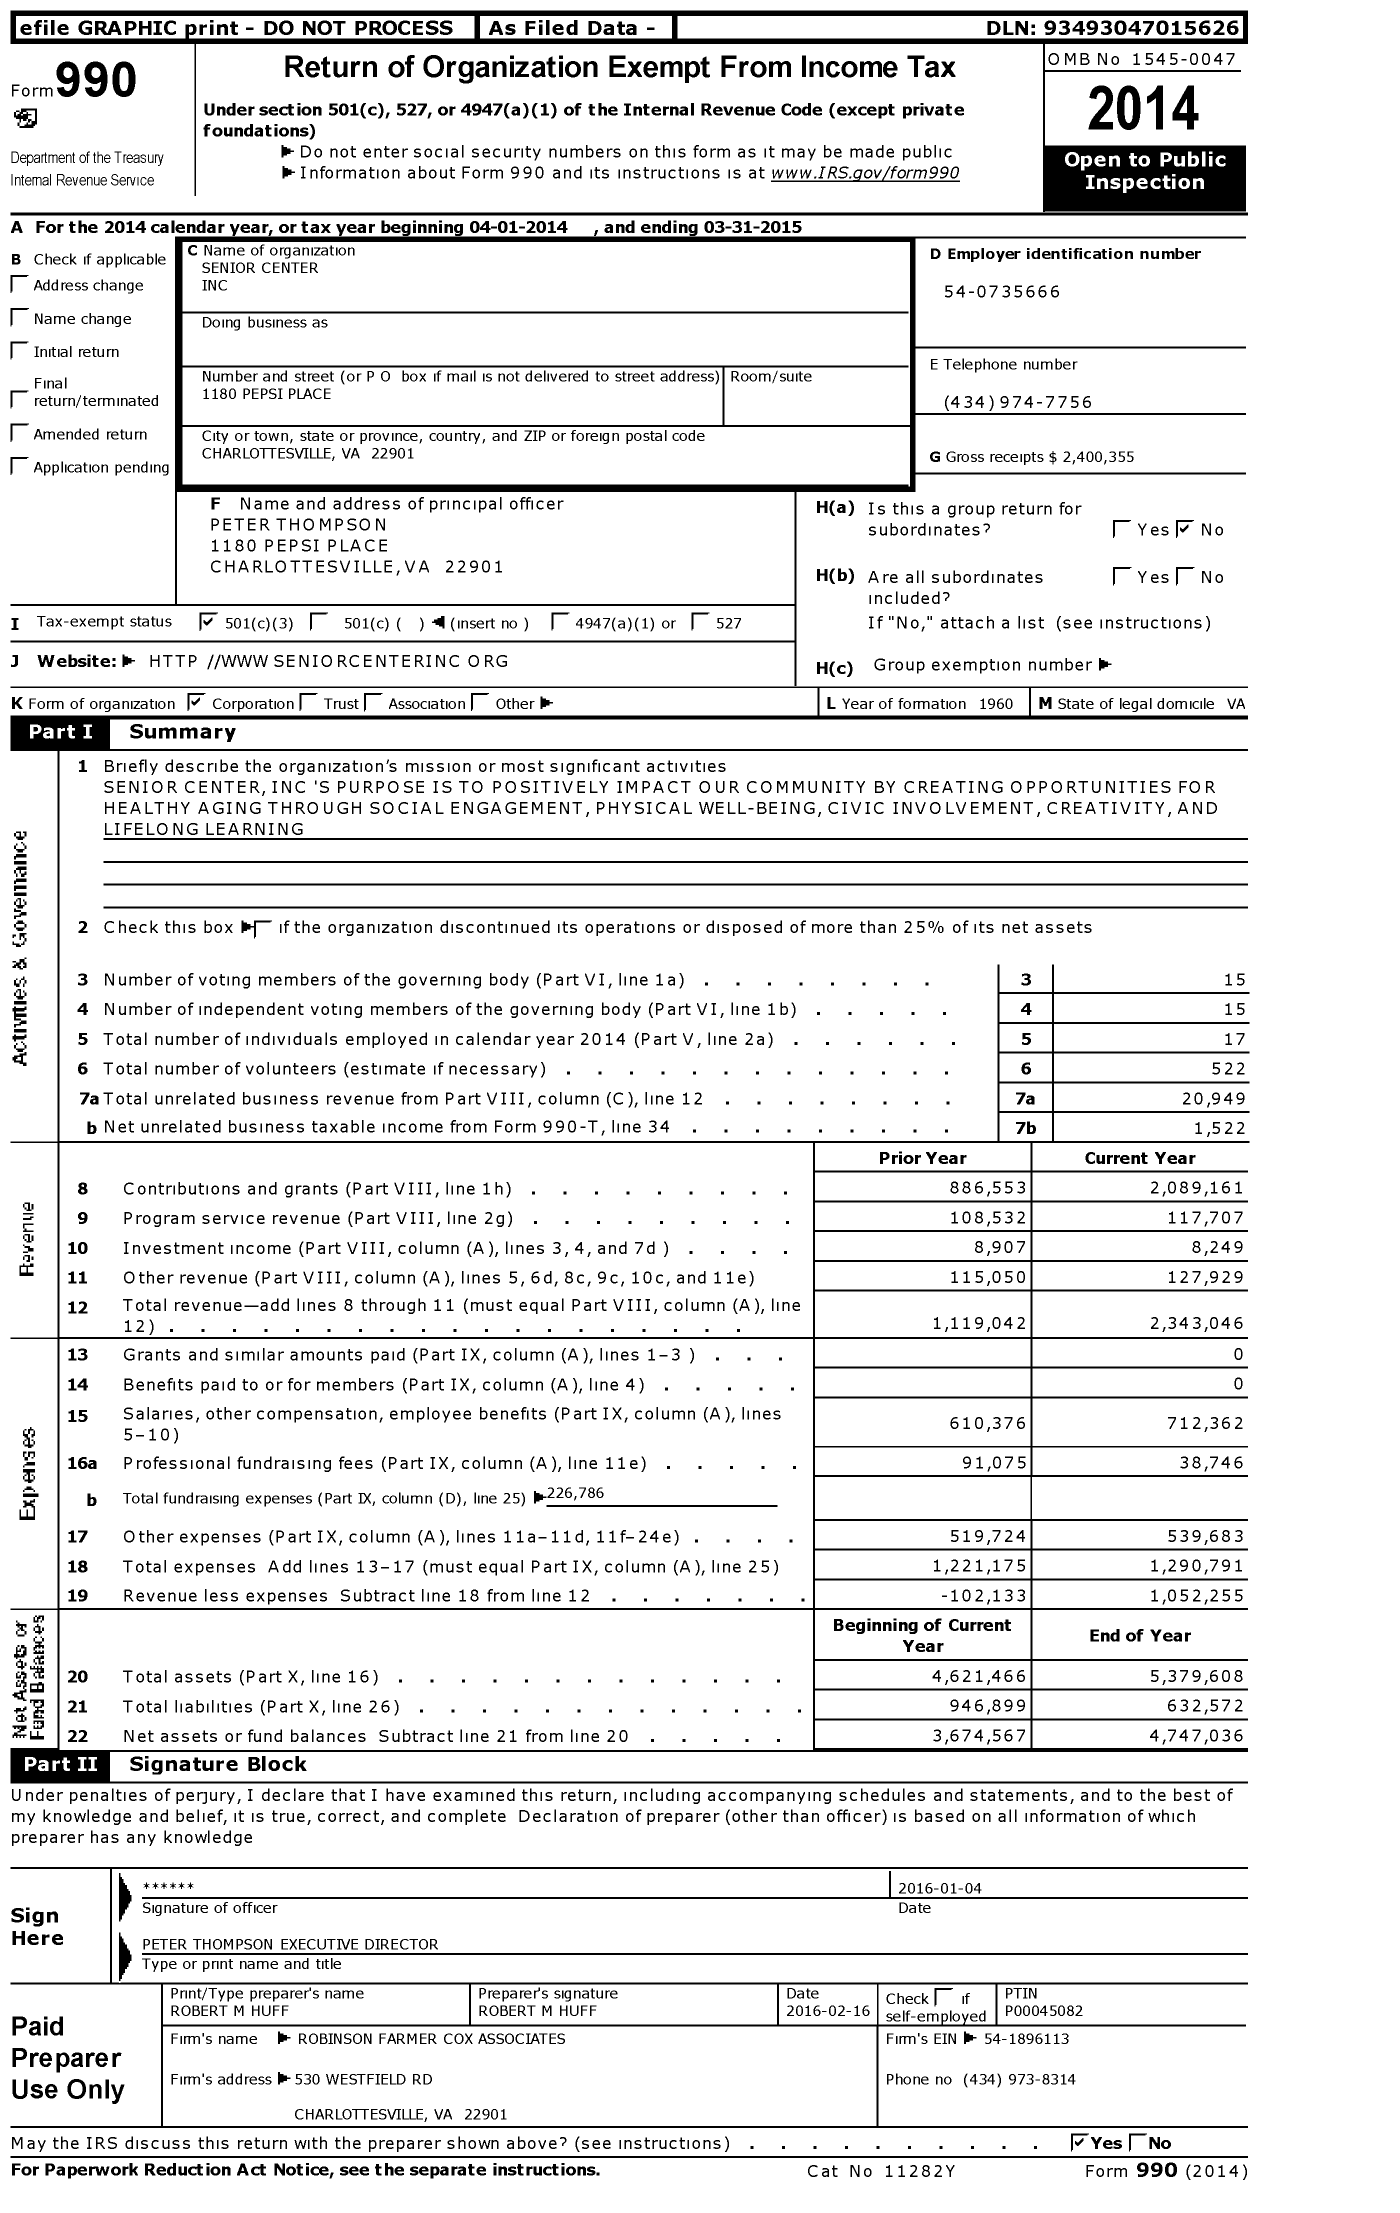 Image of first page of 2014 Form 990 for The Center / Senior Center Inc